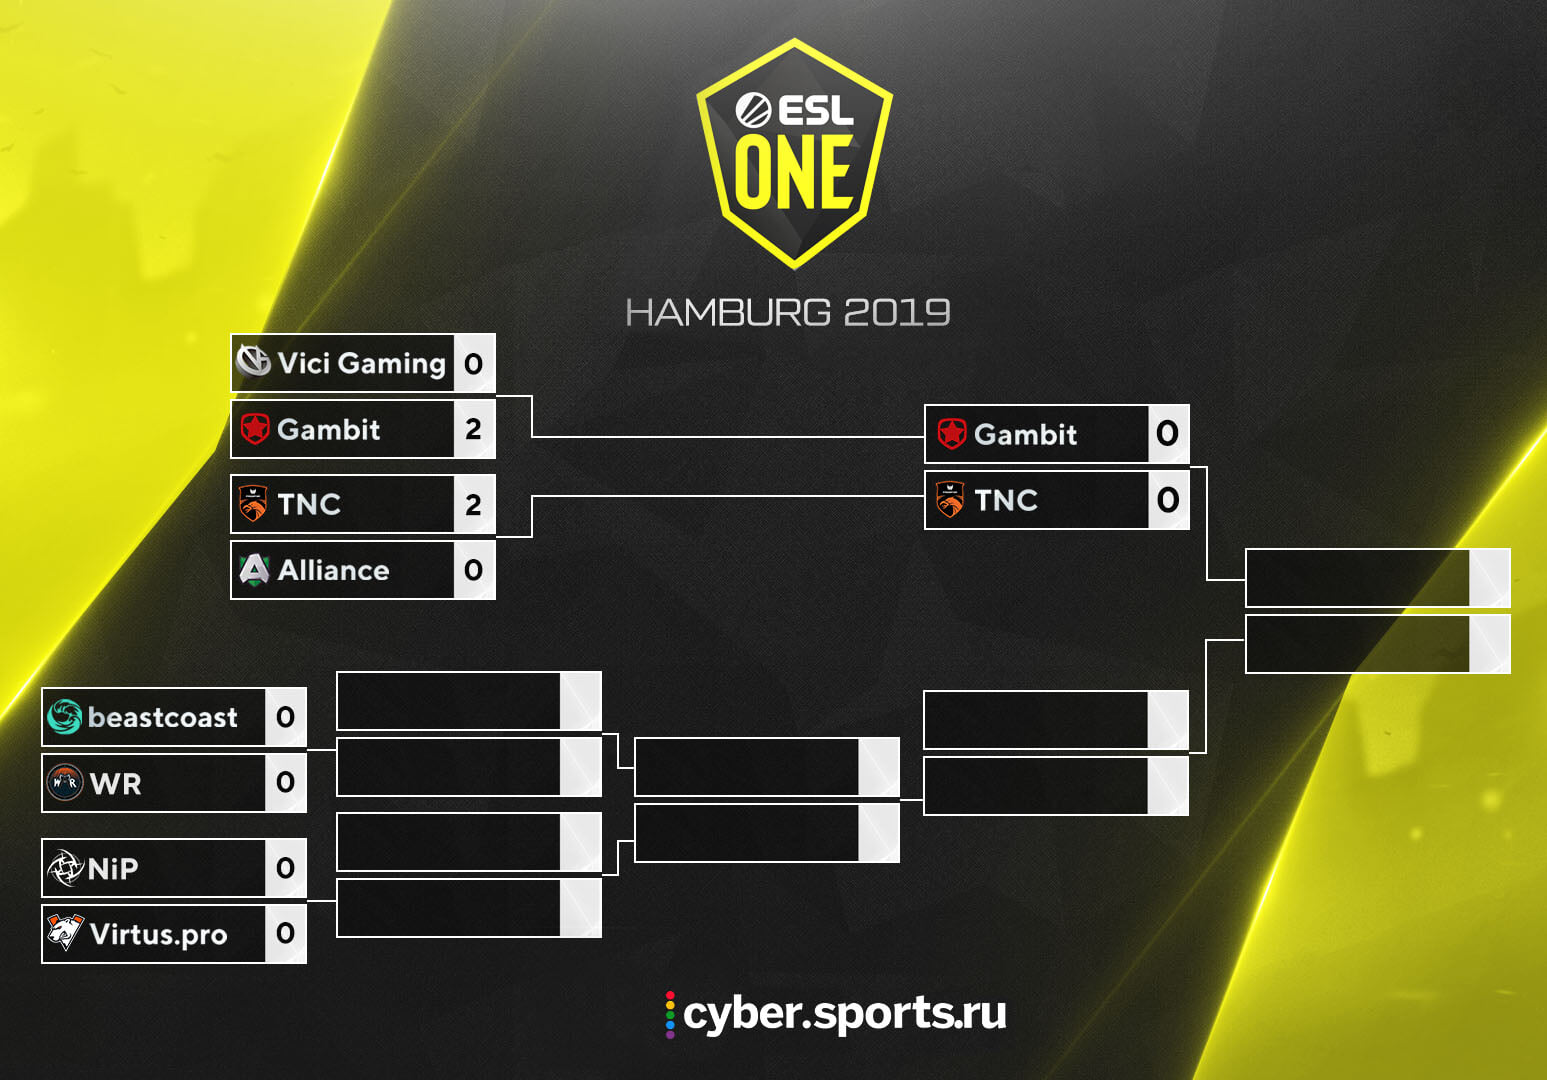 Schedule of matches of ESL One Hamburg on October 25. Play-off. Beastcoast again